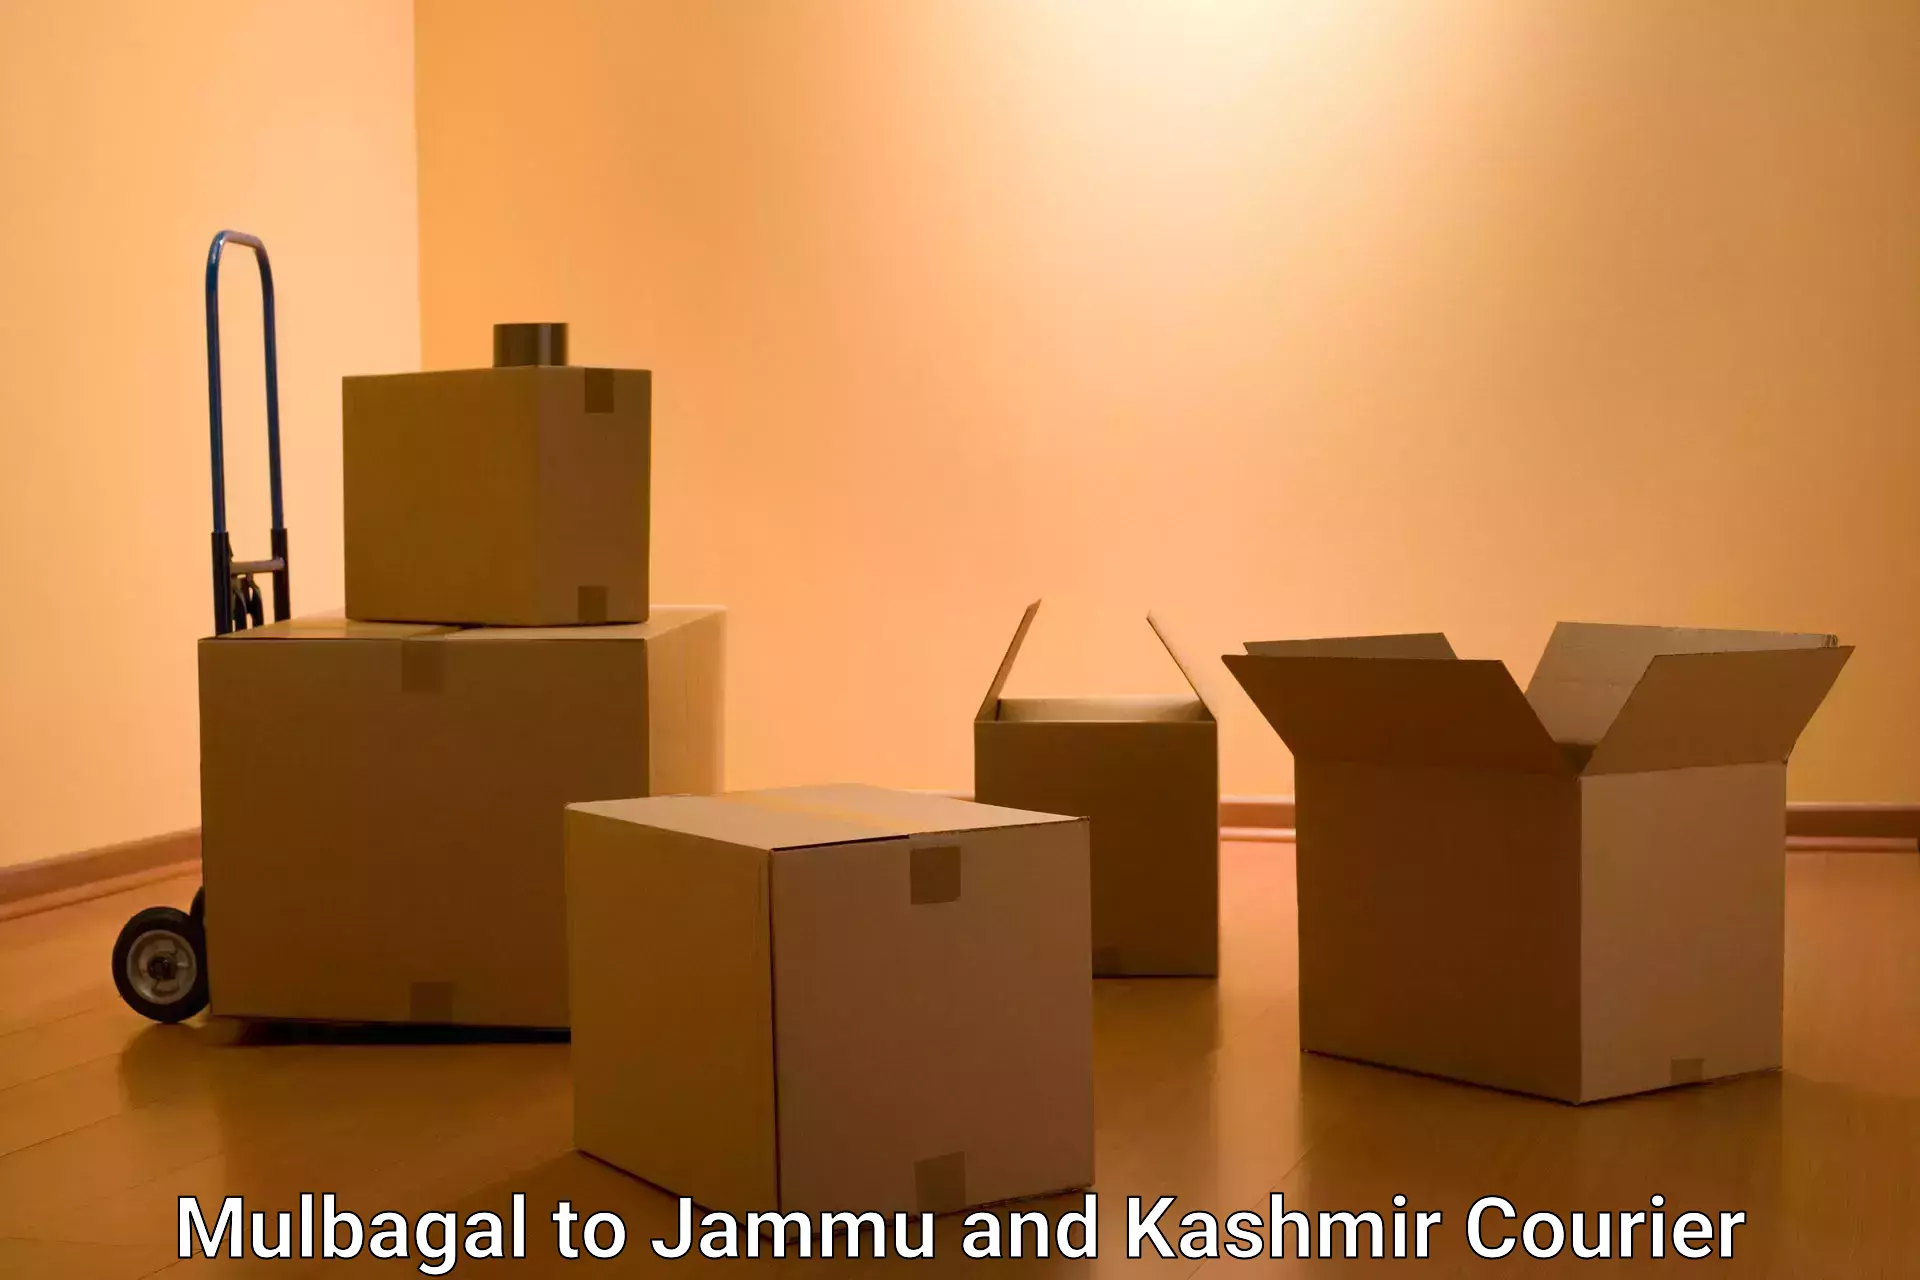 Wholesale parcel delivery in Mulbagal to Anantnag